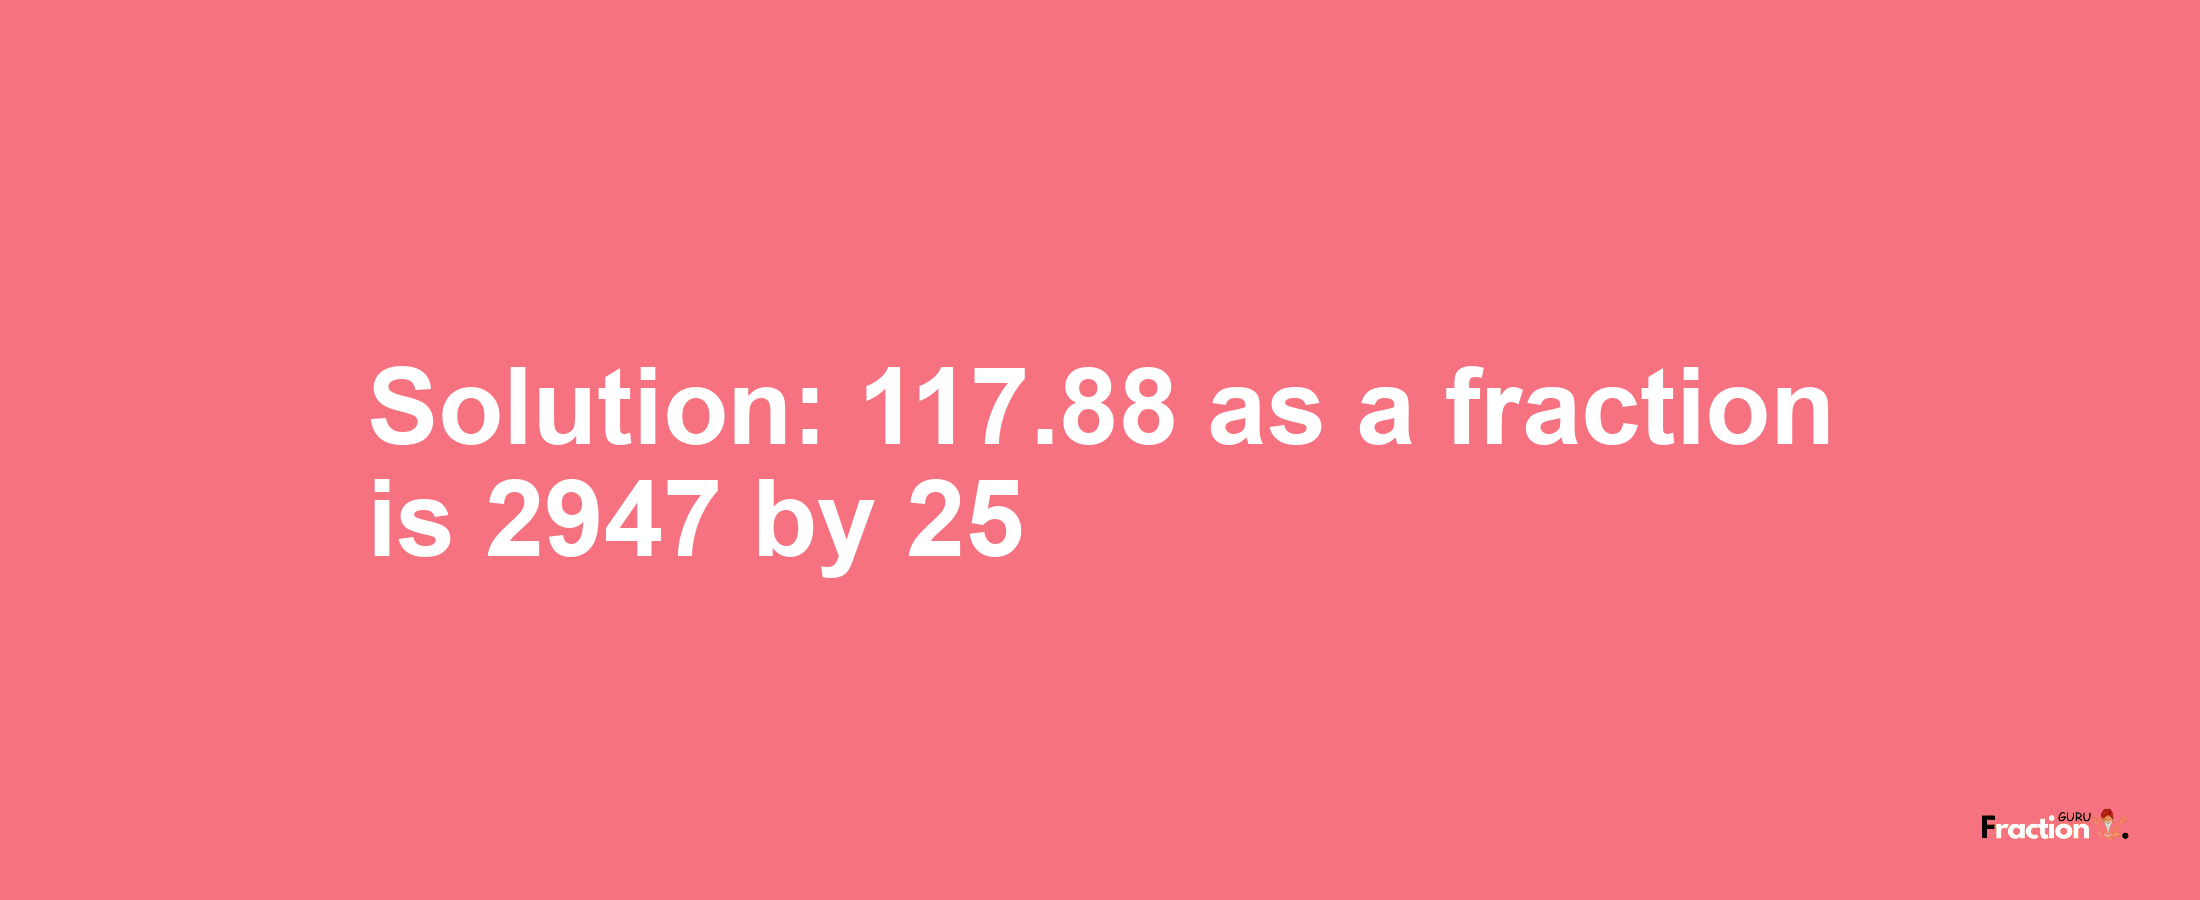 Solution:117.88 as a fraction is 2947/25